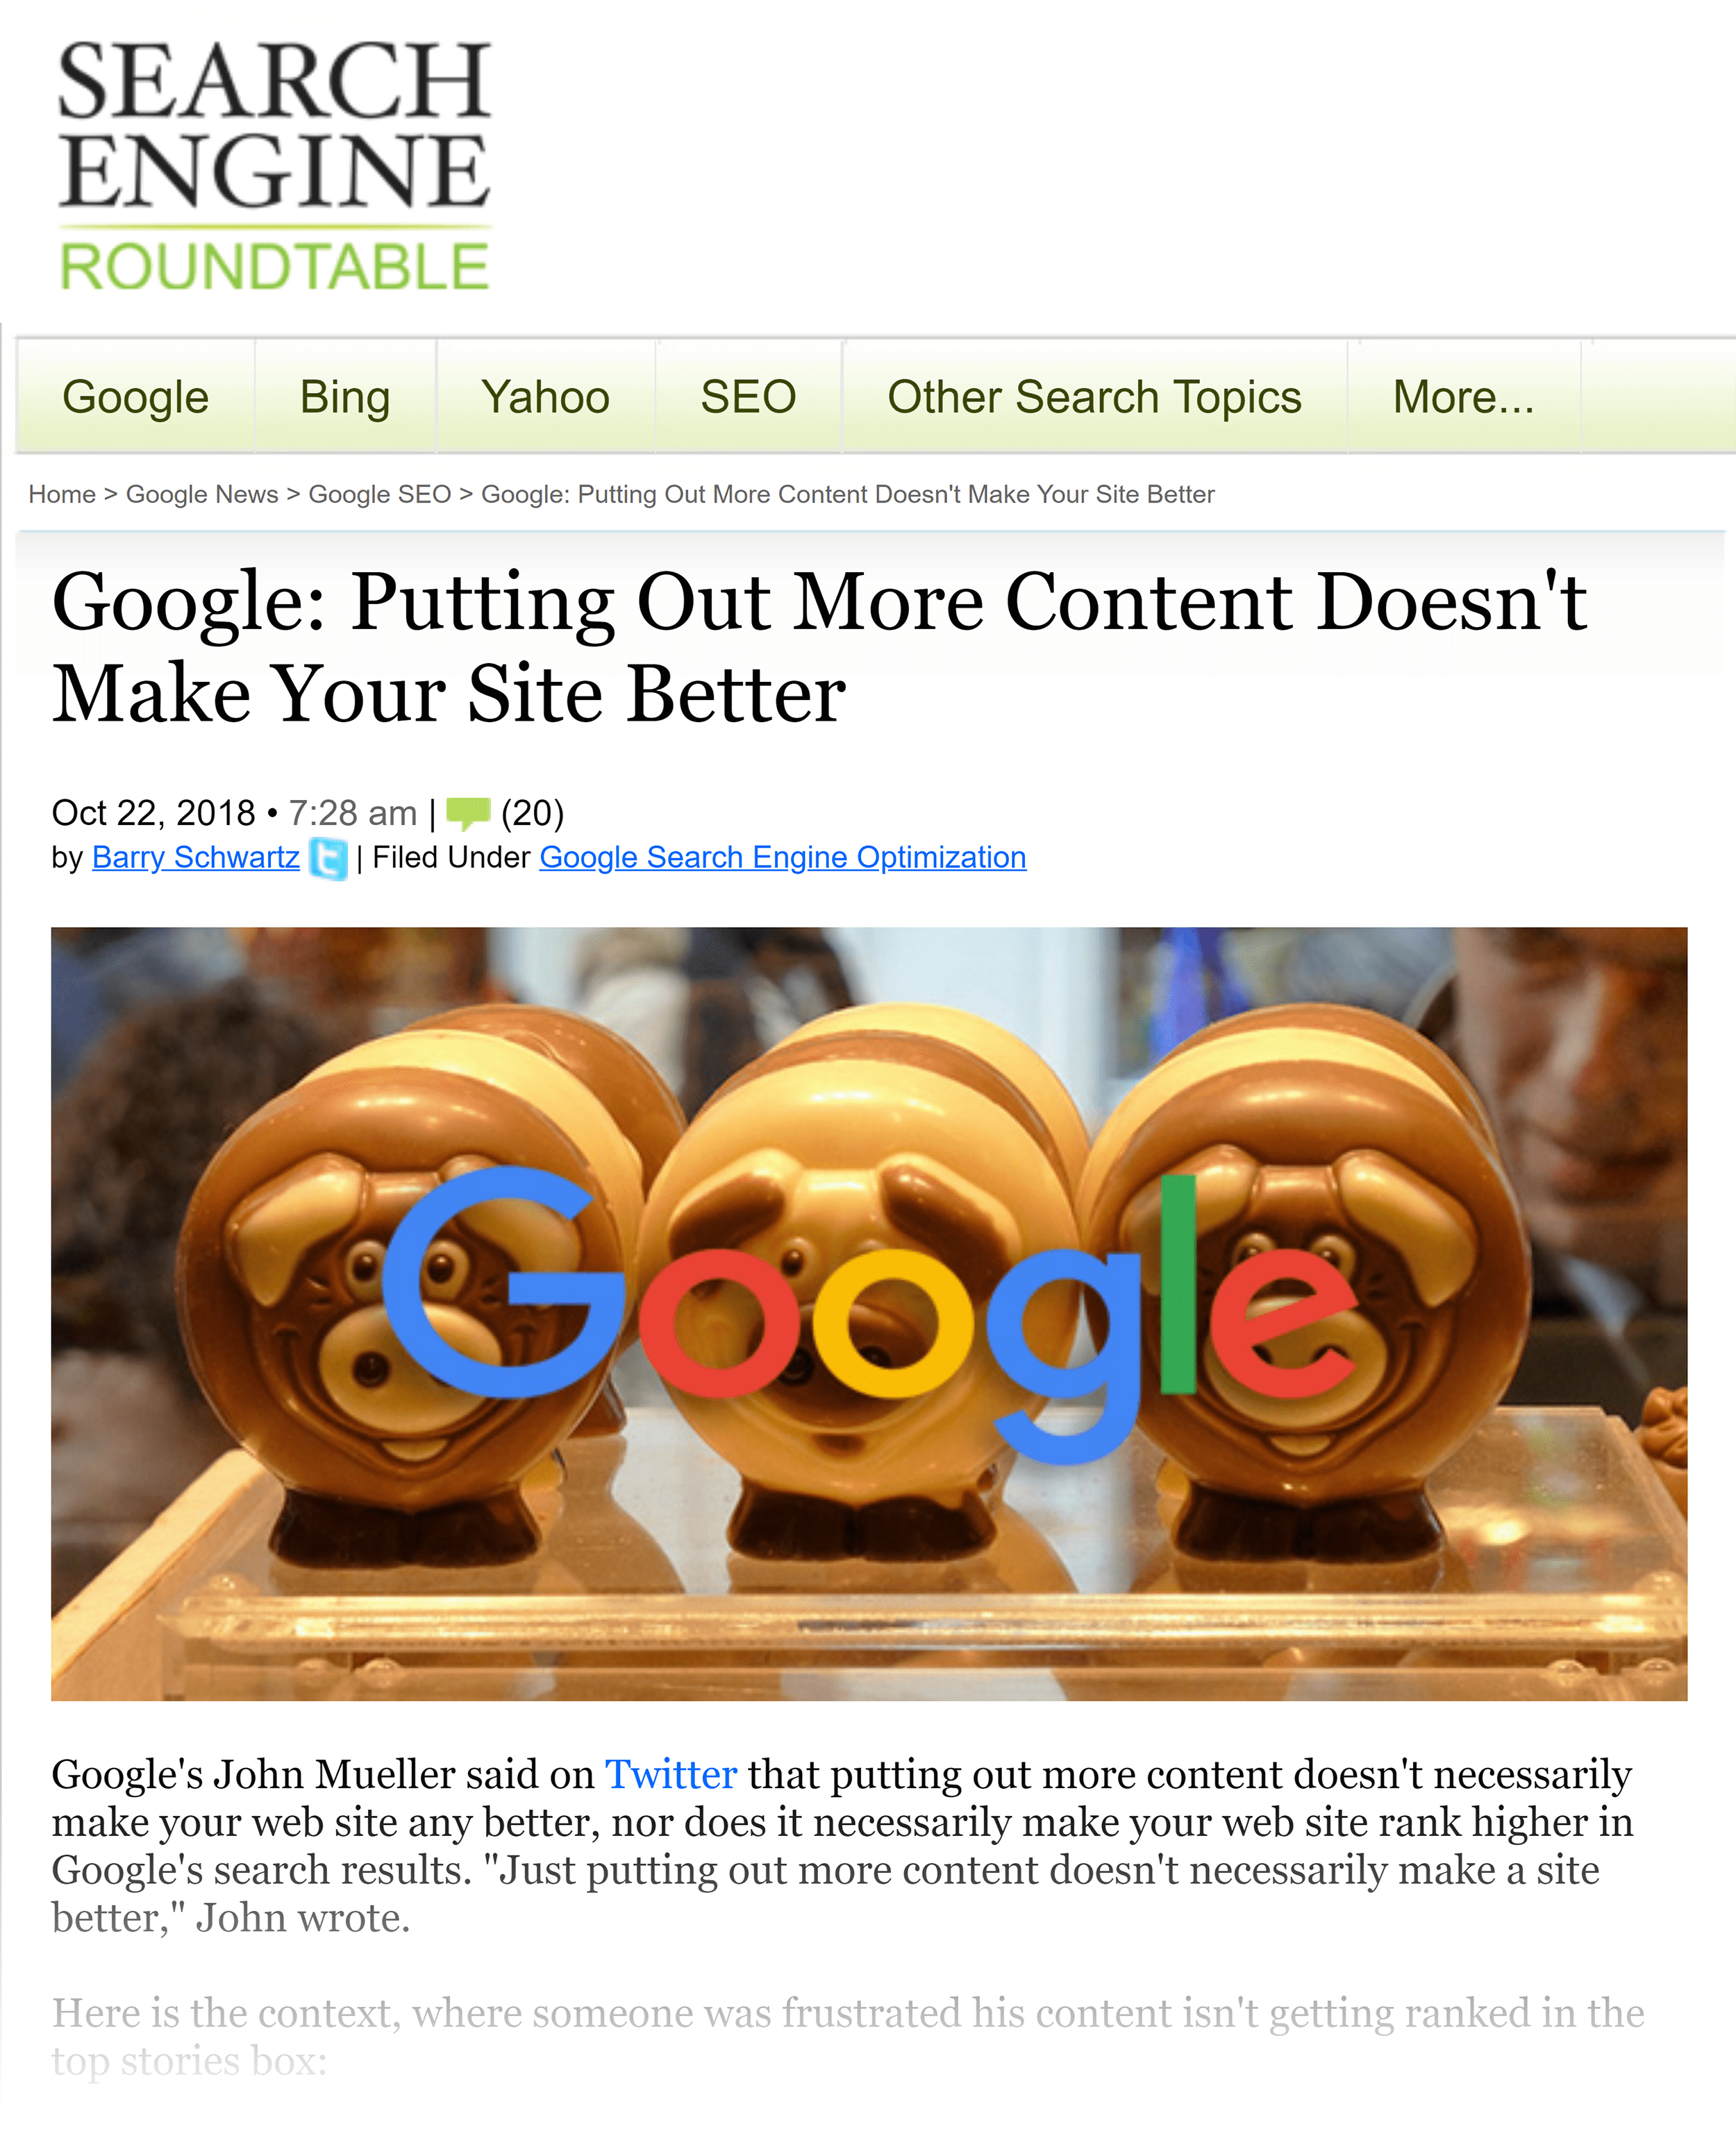 Search Engine Roundtable – Google: More content isn't better